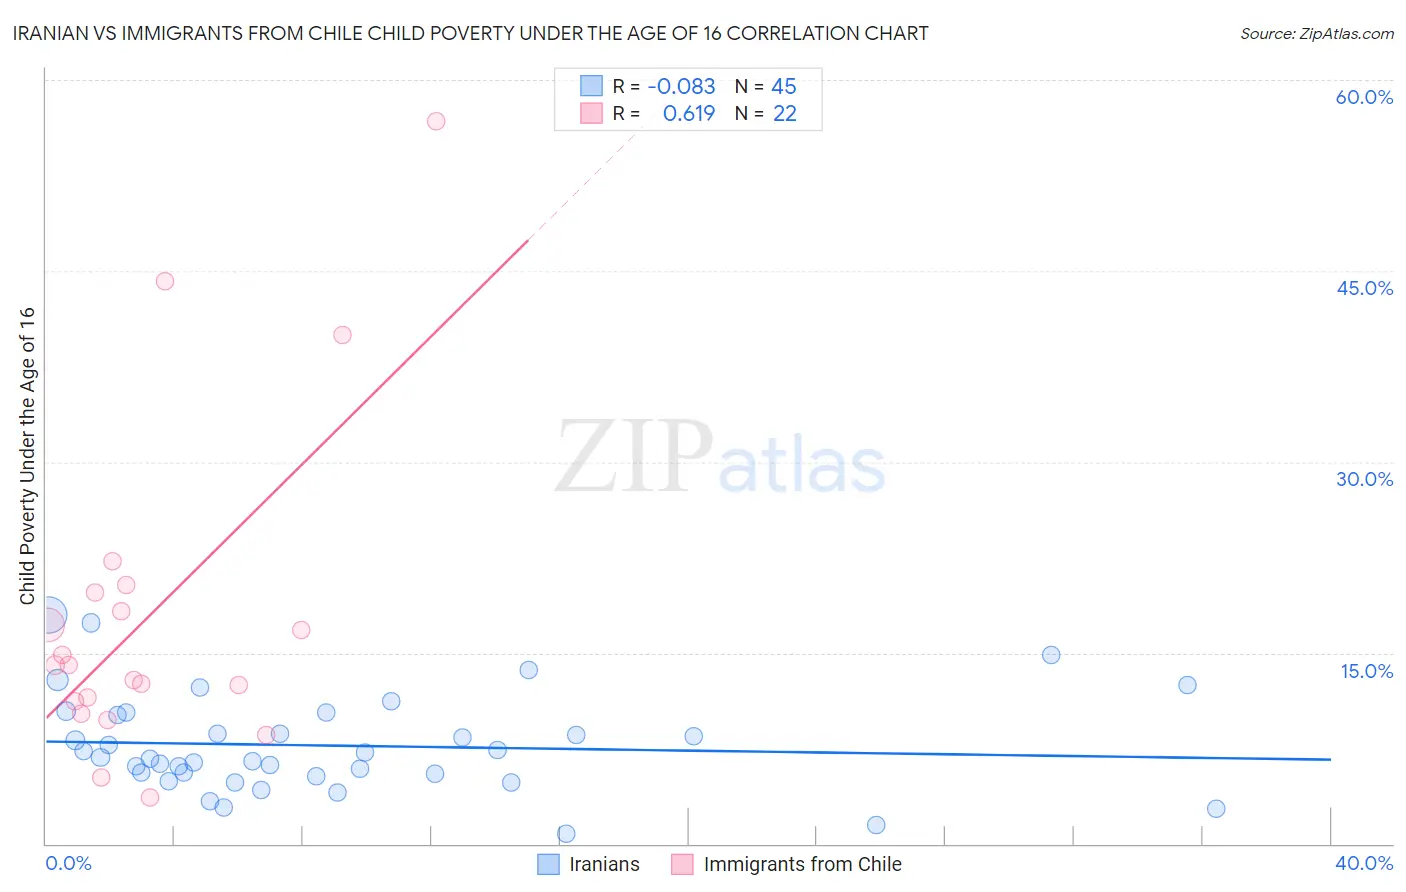 Iranian vs Immigrants from Chile Child Poverty Under the Age of 16